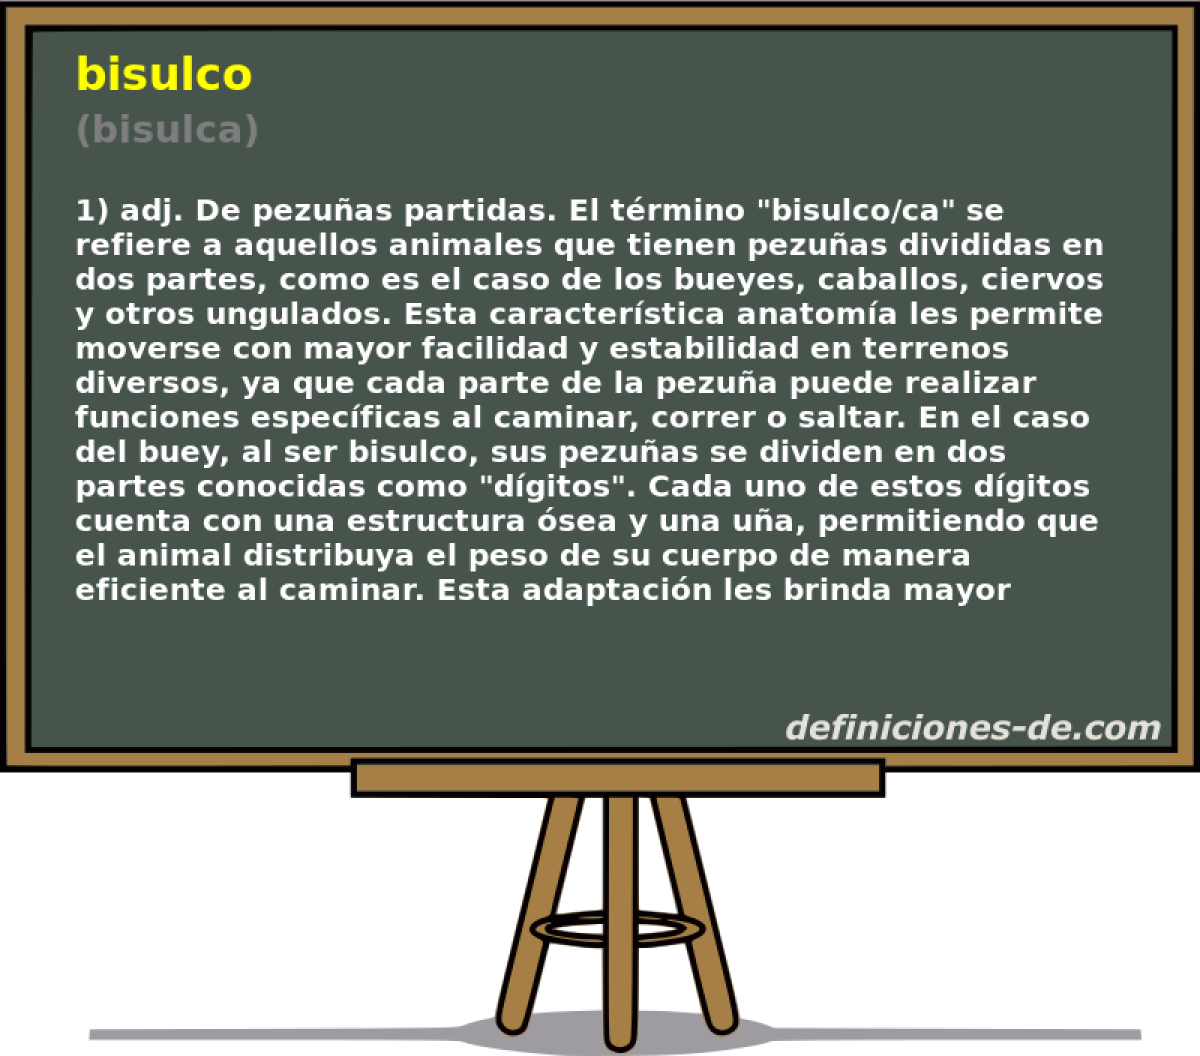 bisulco (bisulca)